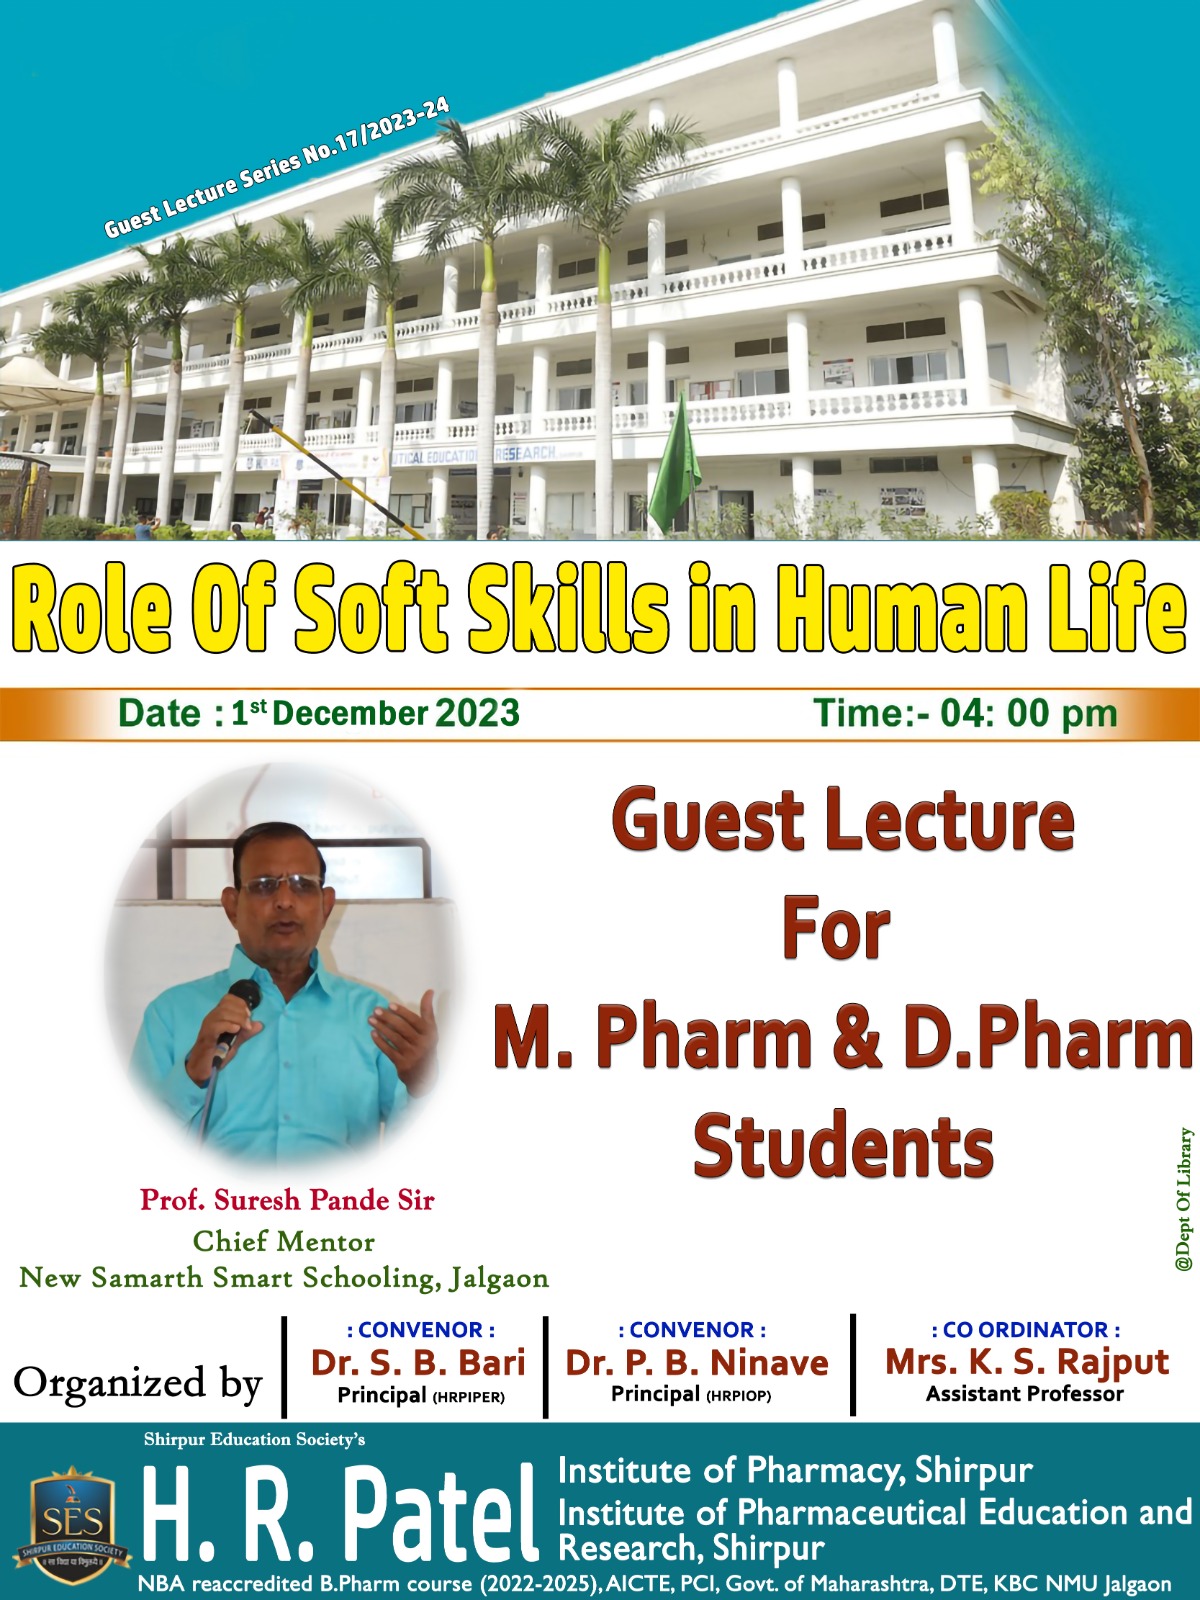 Guest Lecture by Prof. Suresh Pande